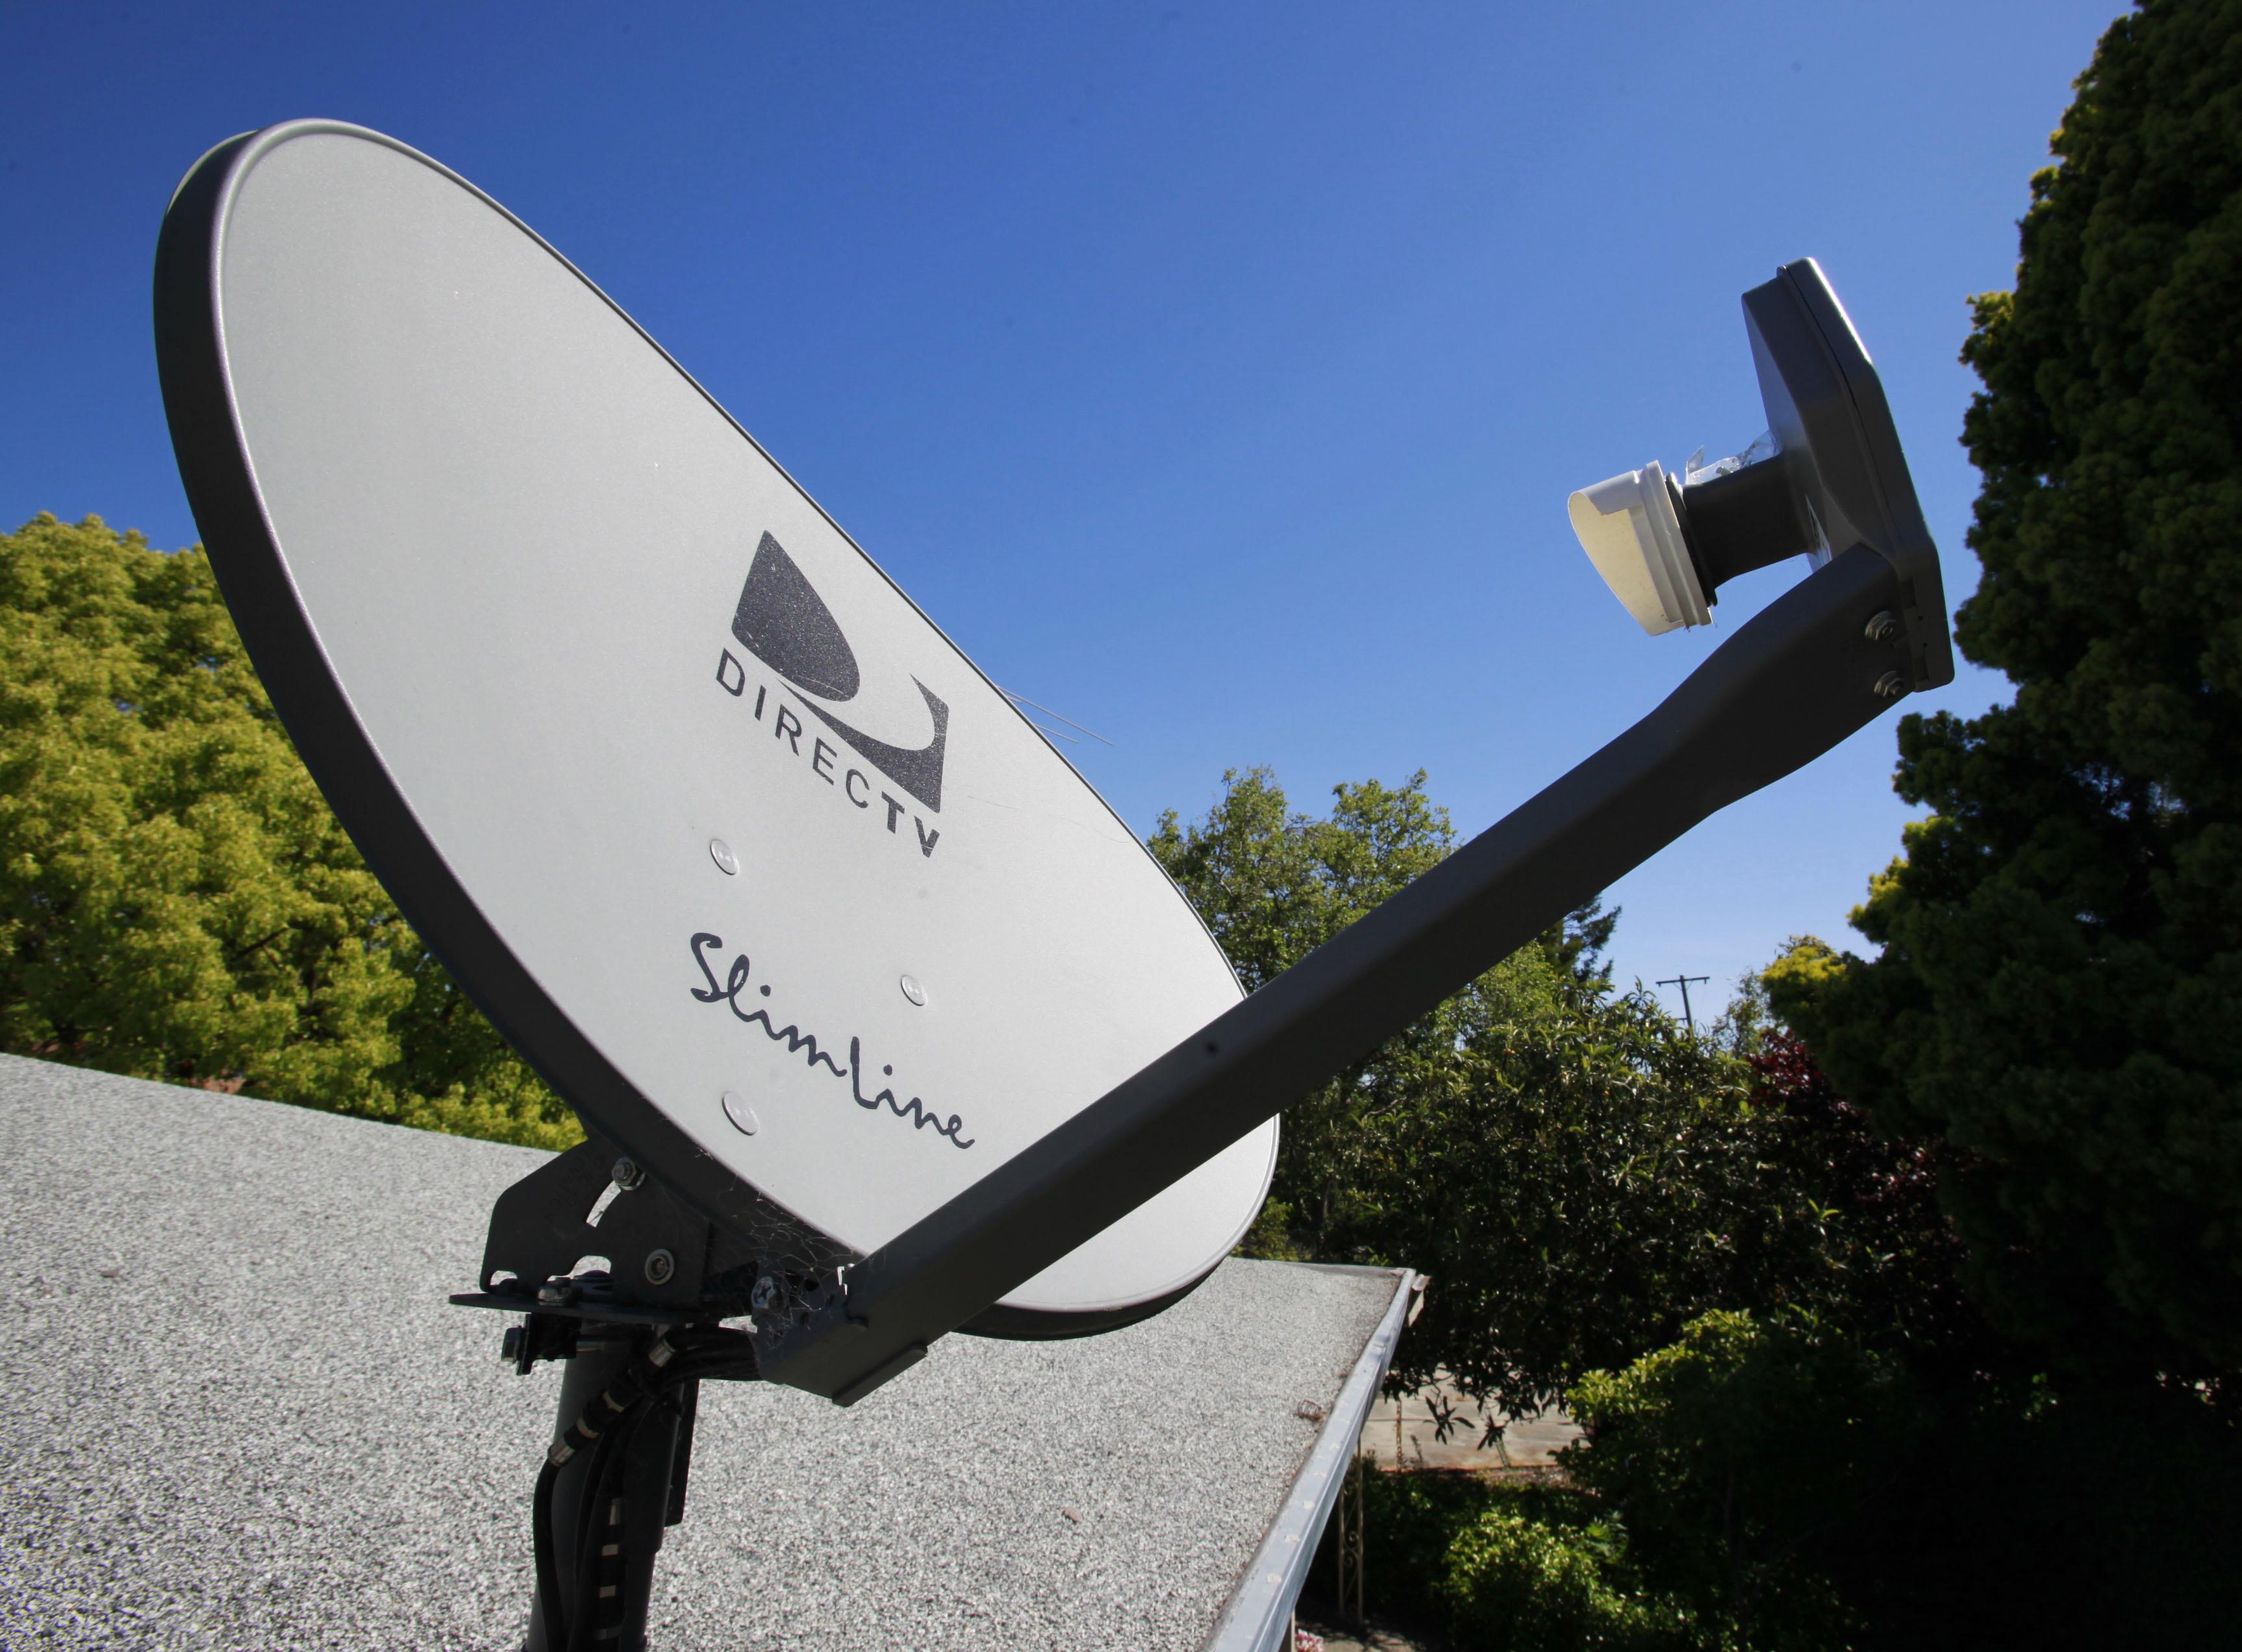 Outrage erupts on right as DirecTV pulls plug on conservative Newsmax network photo